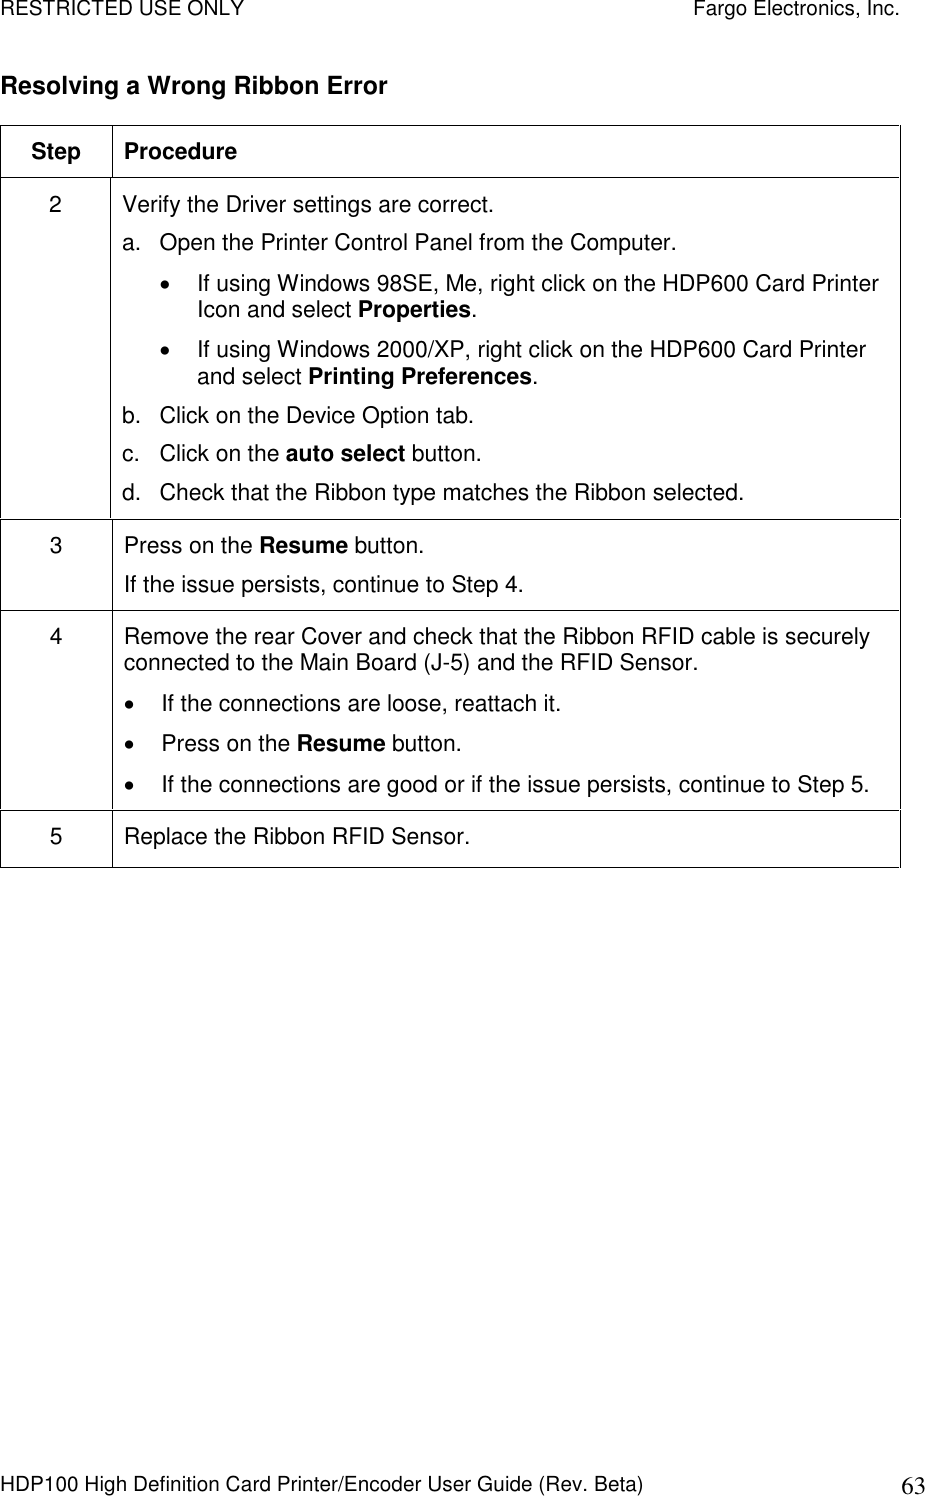 RESTRICTED USE ONLY    Fargo Electronics, Inc. HDP100 High Definition Card Printer/Encoder User Guide (Rev. Beta)  63 Resolving a Wrong Ribbon Error  Step  Procedure 2  Verify the Driver settings are correct. a.  Open the Printer Control Panel from the Computer.   If using Windows 98SE, Me, right click on the HDP600 Card Printer Icon and select Properties.      If using Windows 2000/XP, right click on the HDP600 Card Printer and select Printing Preferences.    b.  Click on the Device Option tab.  c.  Click on the auto select button. d.  Check that the Ribbon type matches the Ribbon selected. 3  Press on the Resume button. If the issue persists, continue to Step 4. 4  Remove the rear Cover and check that the Ribbon RFID cable is securely connected to the Main Board (J-5) and the RFID Sensor.   If the connections are loose, reattach it.   Press on the Resume button.   If the connections are good or if the issue persists, continue to Step 5. 5  Replace the Ribbon RFID Sensor.  